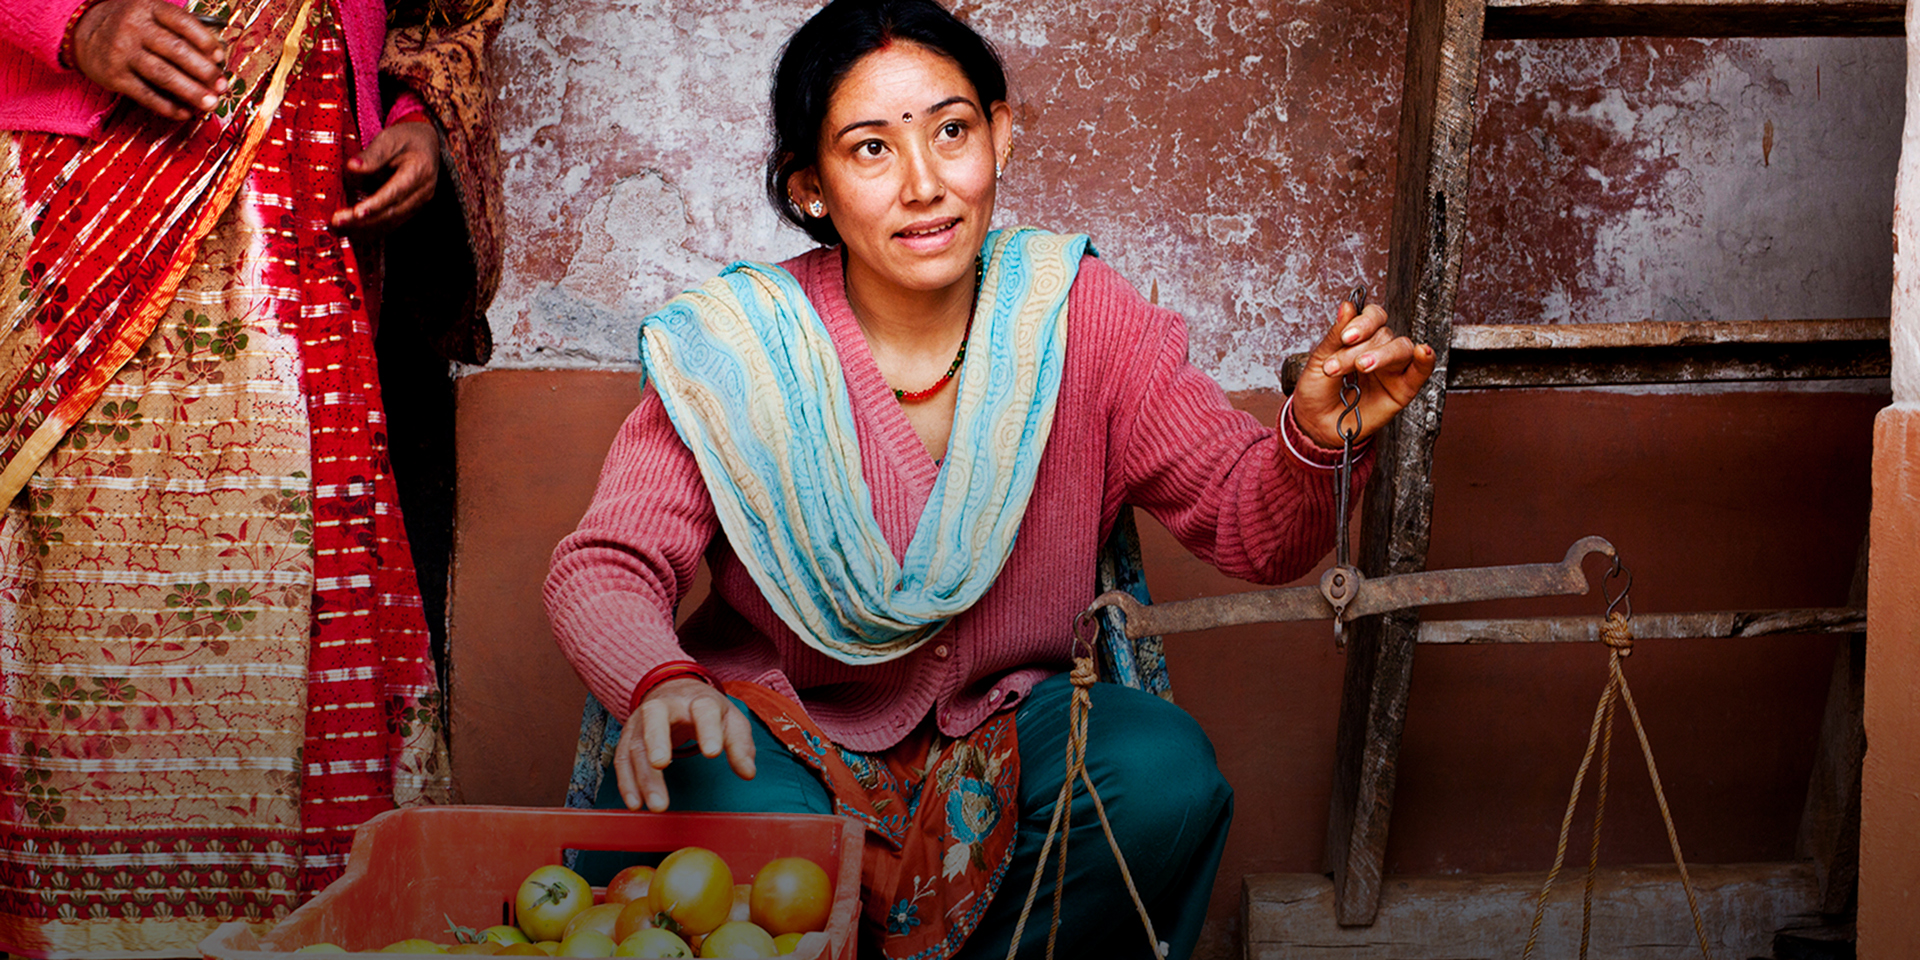 A woman kneeling in front of a wall holding a scale in her right hand and reaching for tomatoes in a red basket with her left hand.